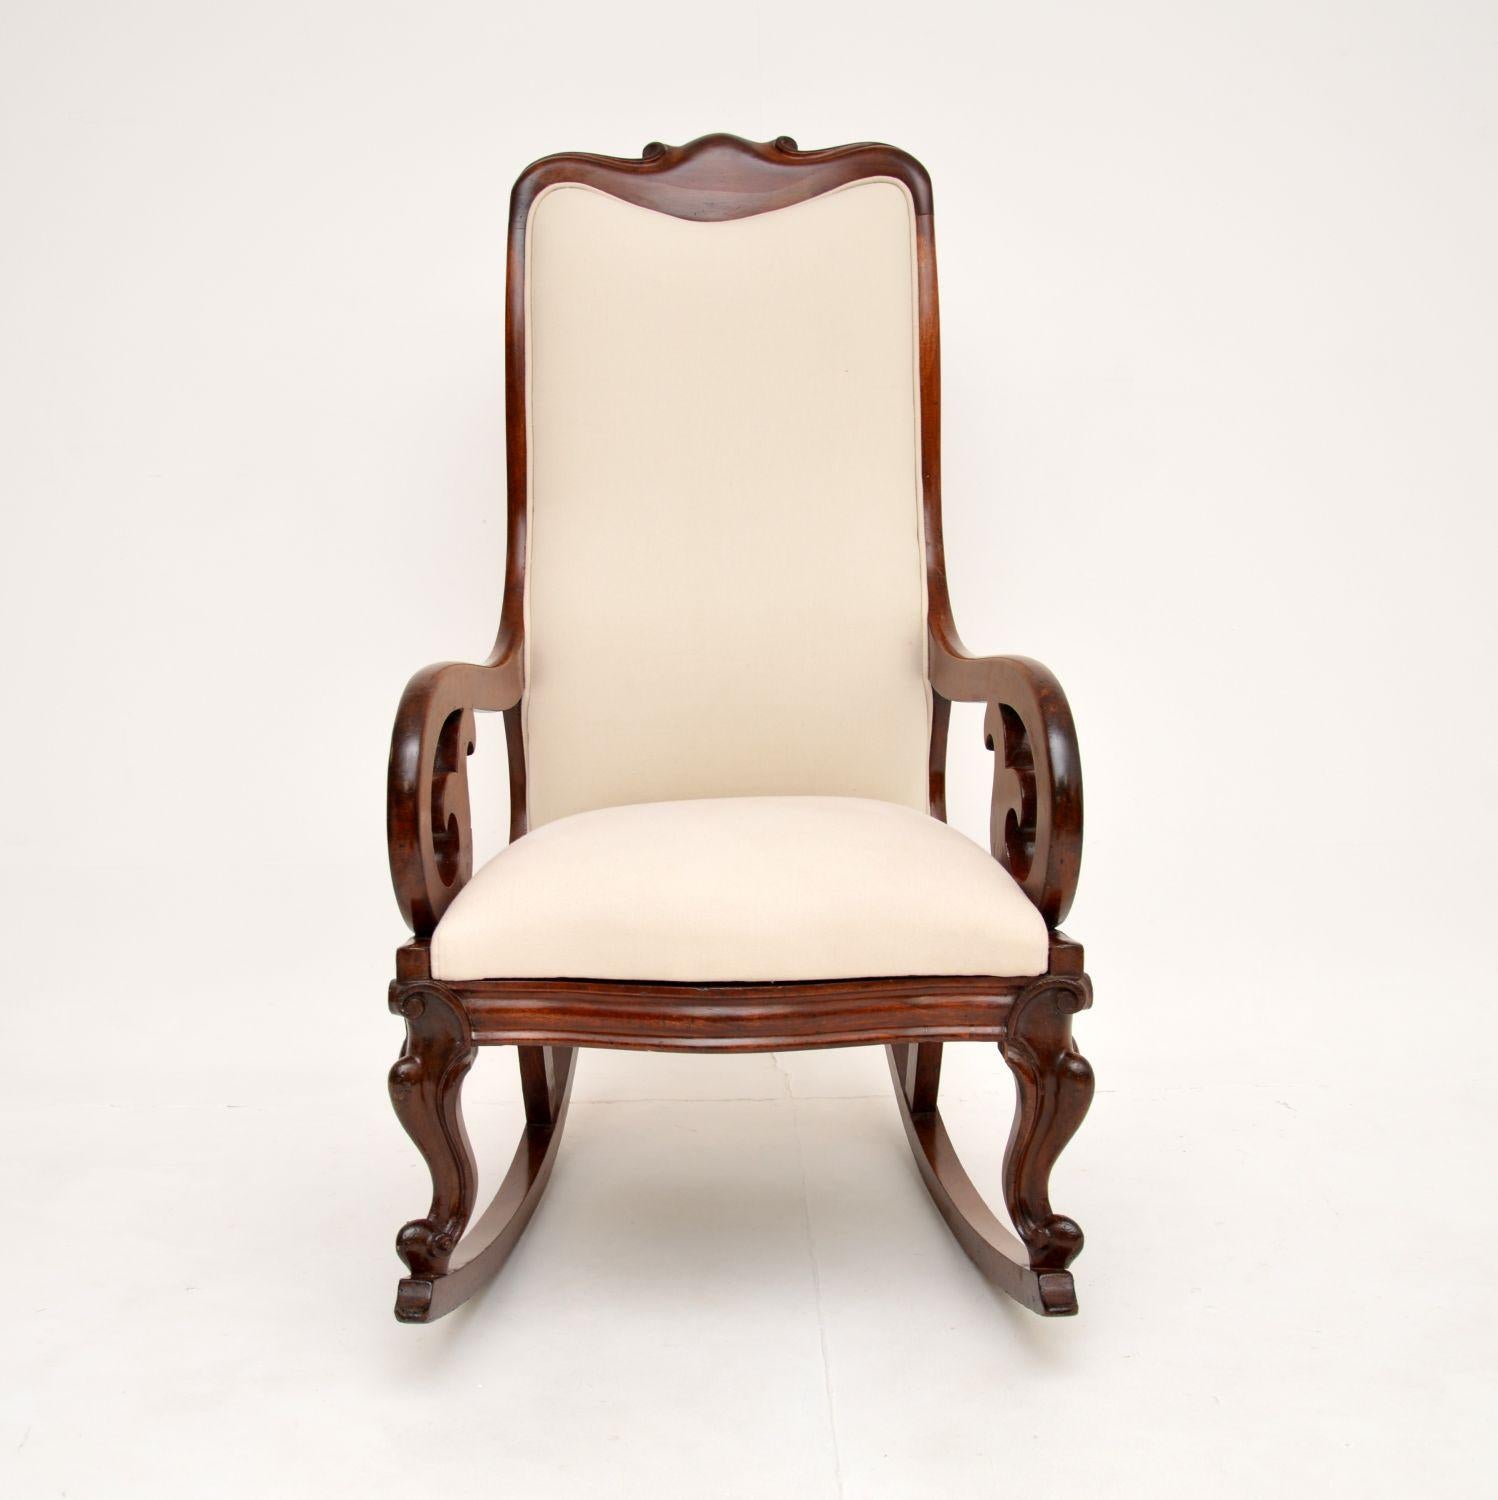 A smart and beautifully made antique Victorian rocking chair. This was made in England, it dates from around the 1860-1880 period.

It is of superb quality and is very comfortable. The frame has a gorgeous, sweeping design and looks great from